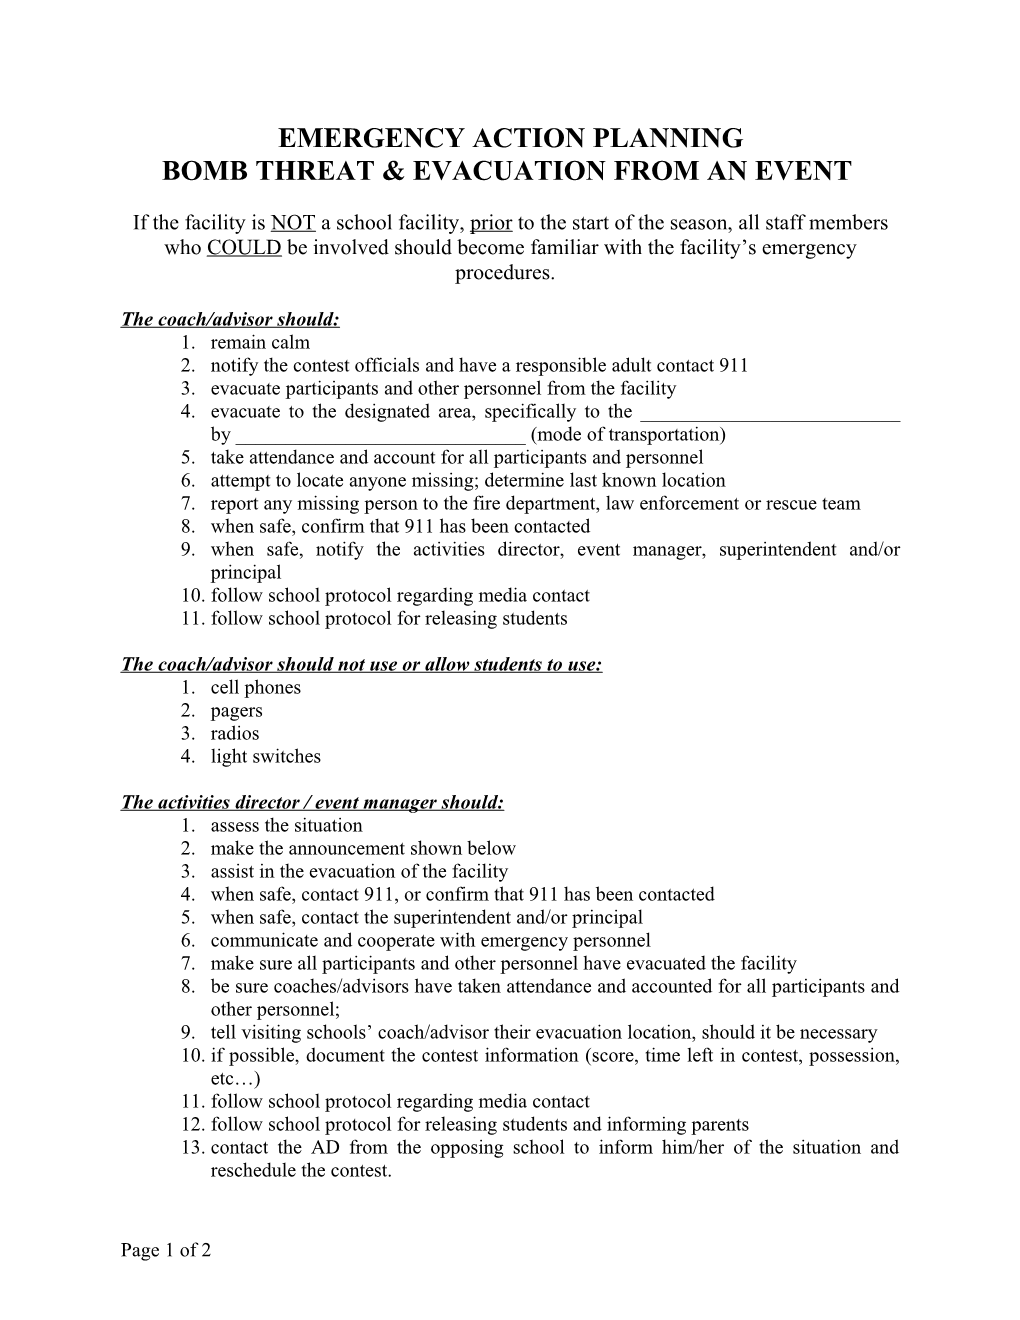 Bomb Threat & Evacuation from an Event